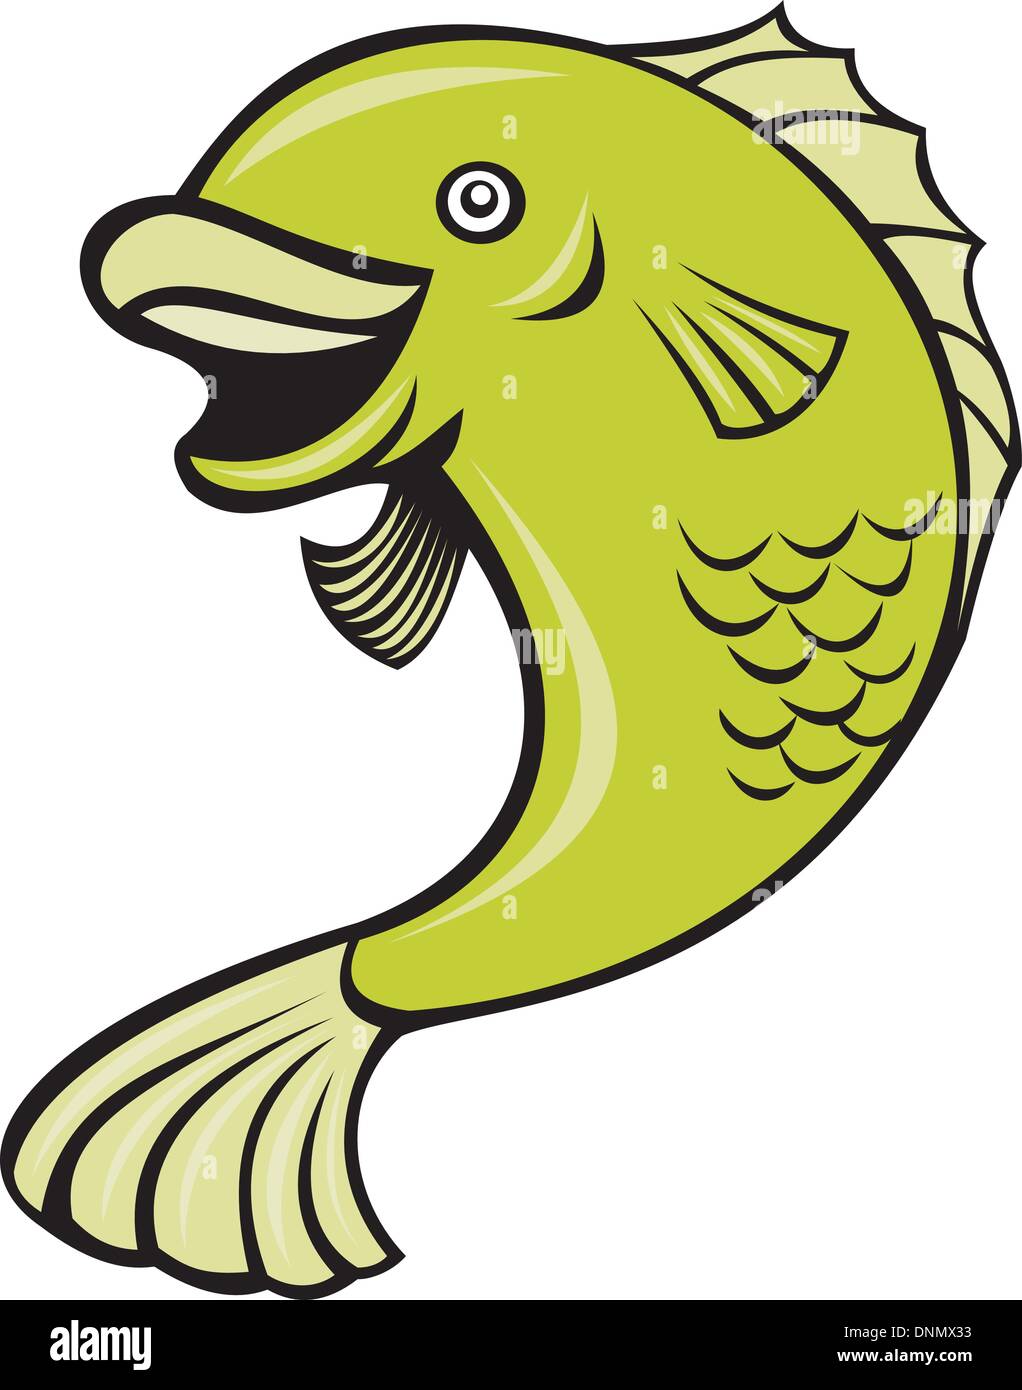 Illustration of a largemouth bass fish jumping done in cartoon